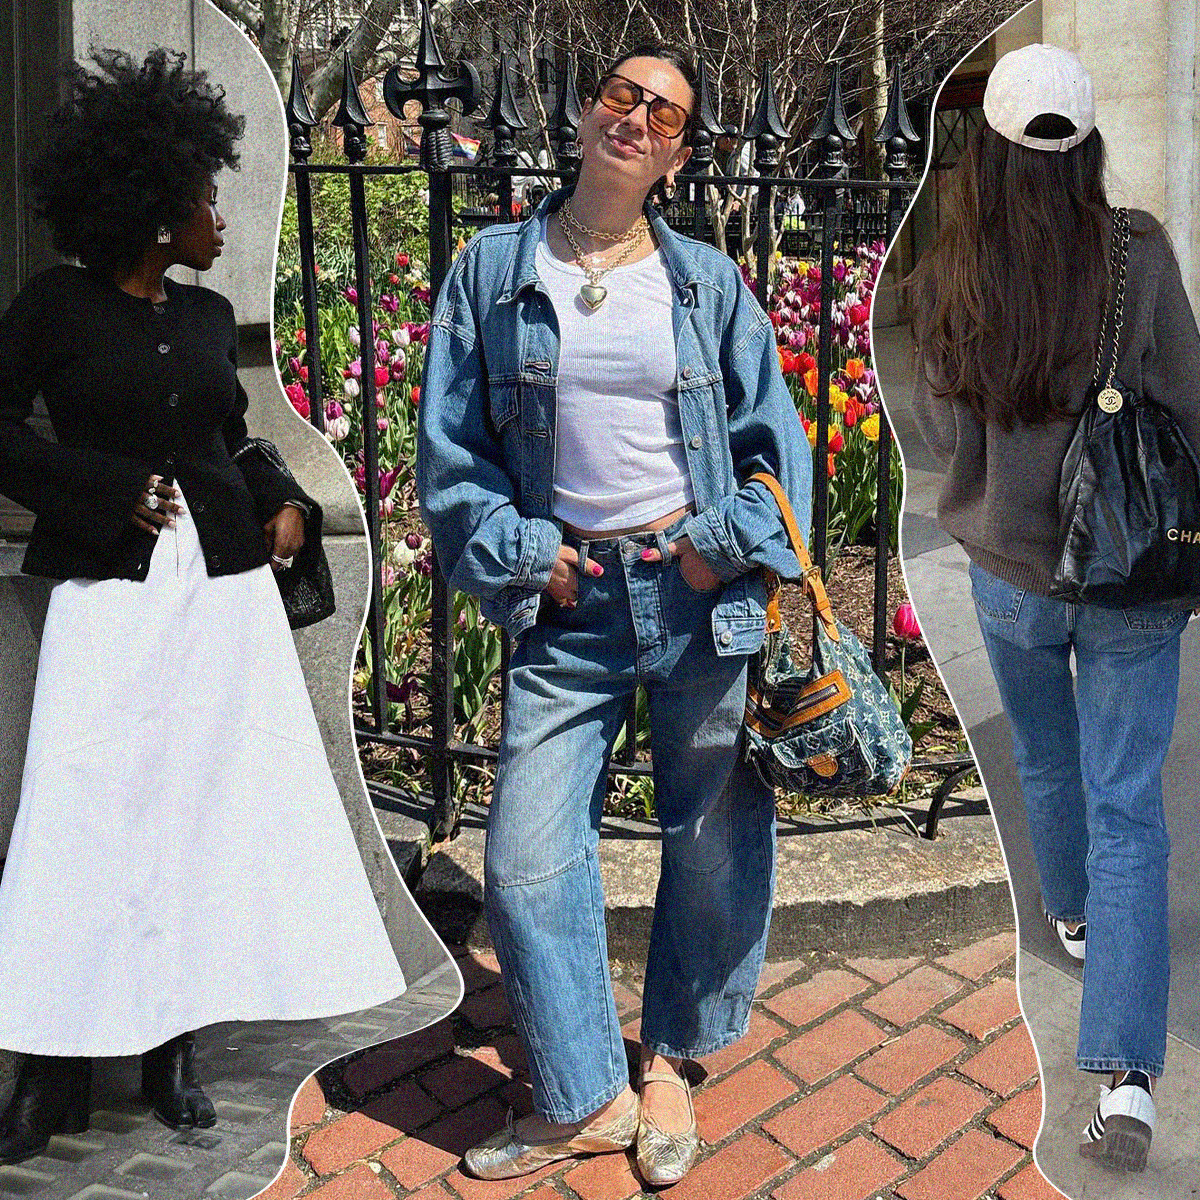 I Live on the Upper East Side—These Fashion Items Are Viral Around Here